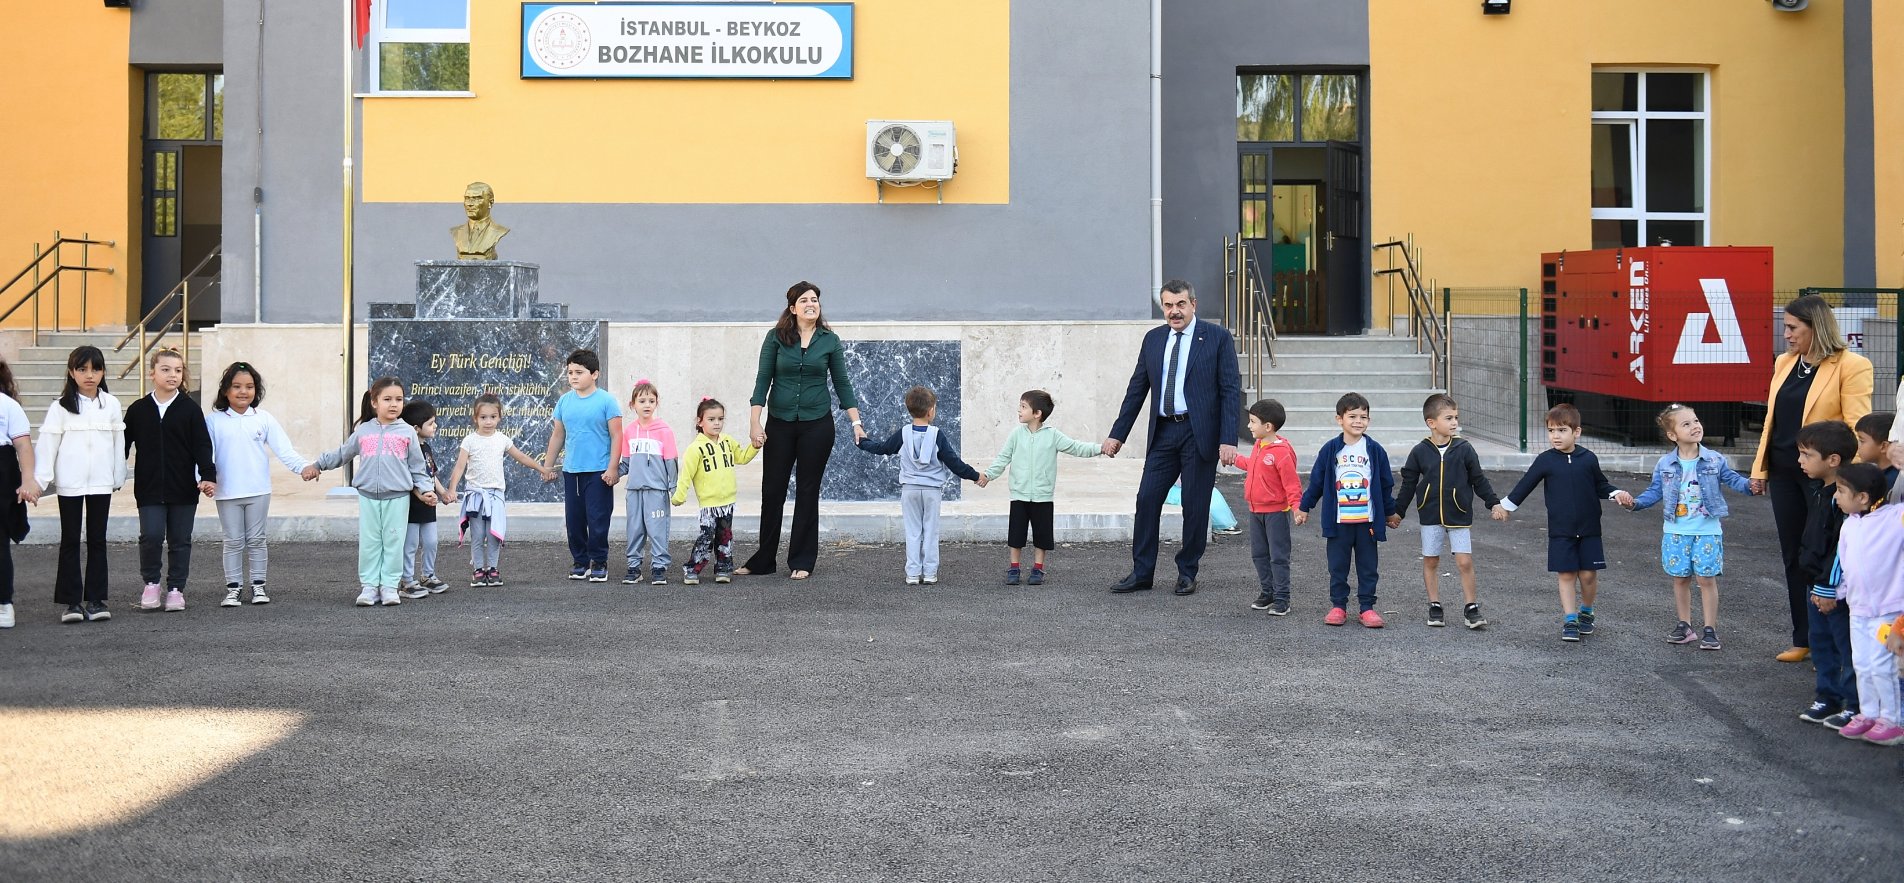 TRADITIONAL GAMES WILL BE PLAYED AGAIN IN SCHOOL GARDENS